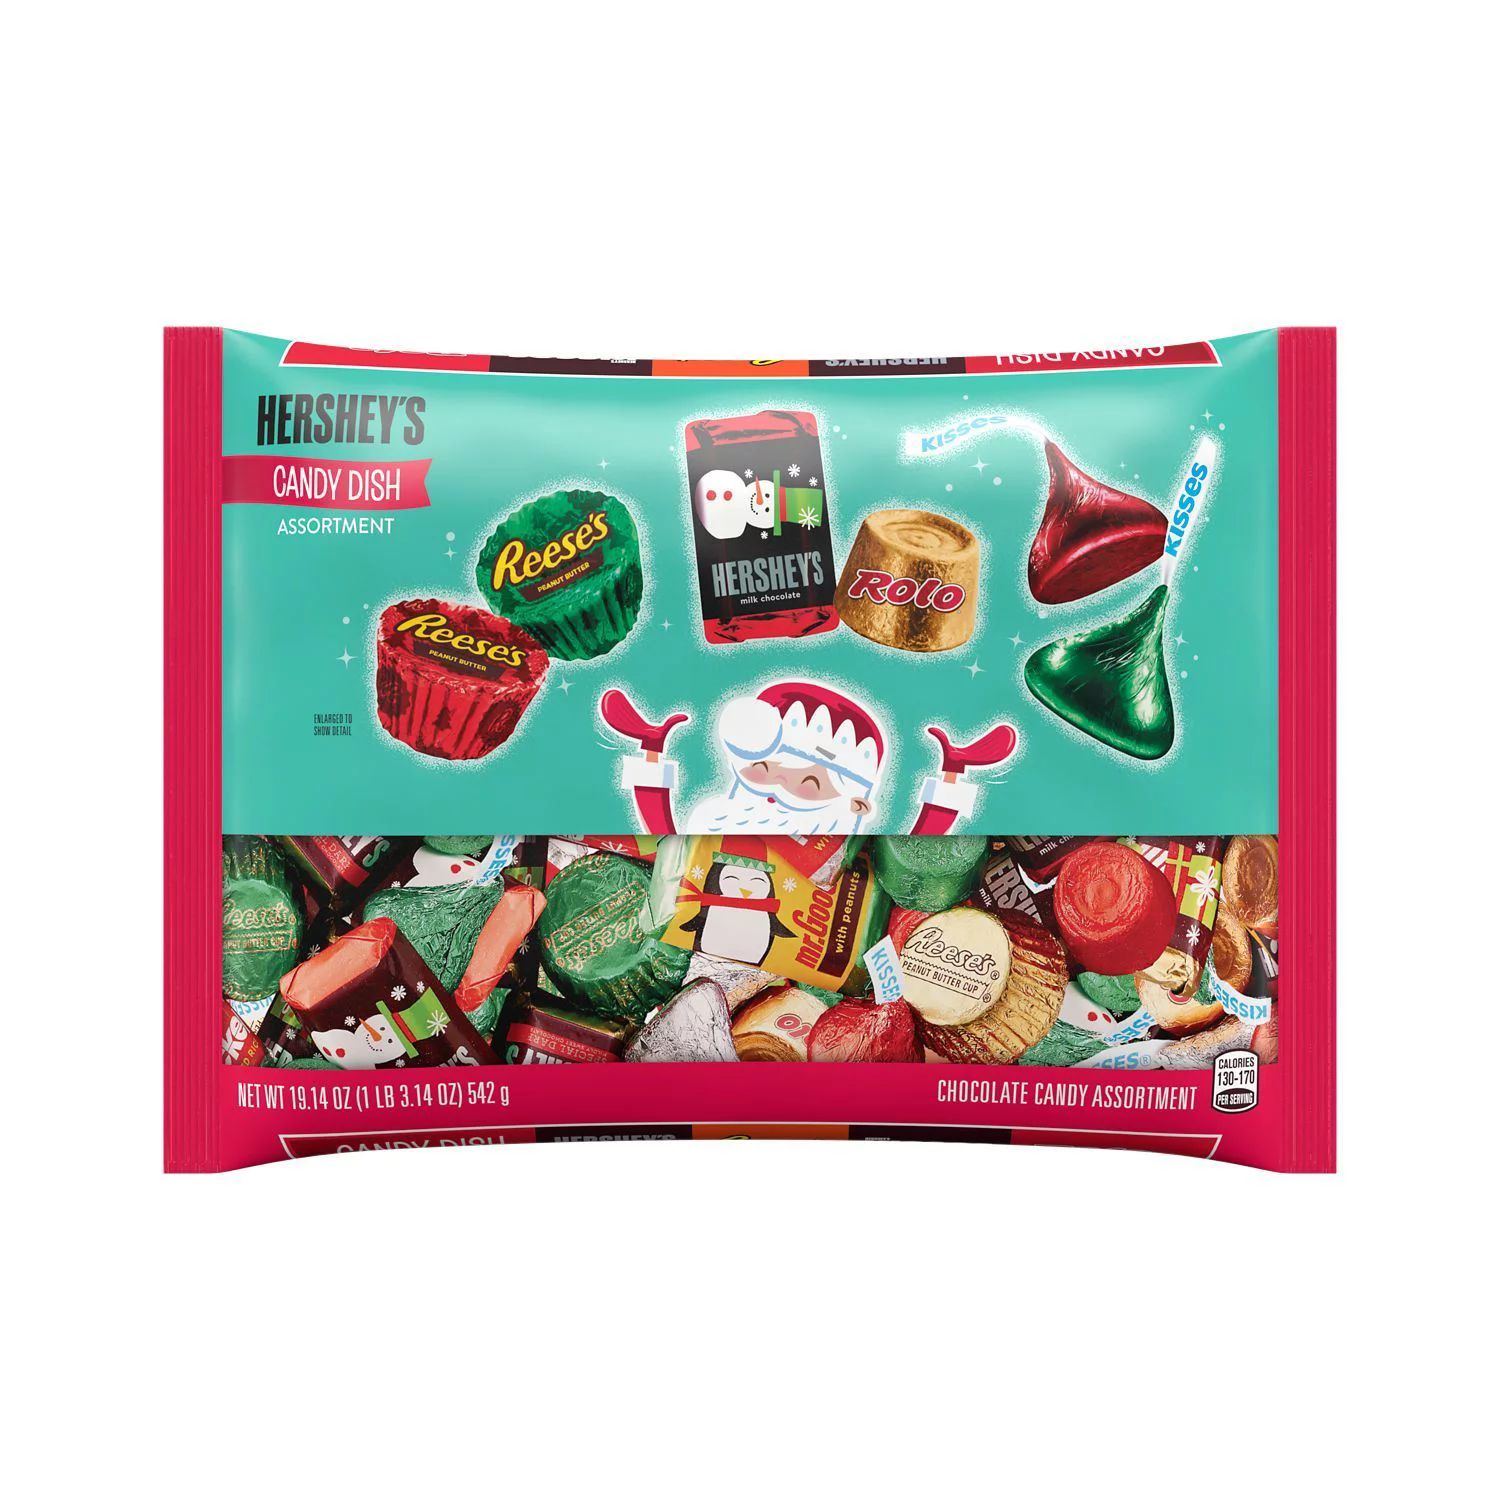 HERSHEY'S, REESE'S and ROLO®, Candy Dish Assortment Chocolate Assortment Candy, Holiday, 19.14 o... | Walmart (US)